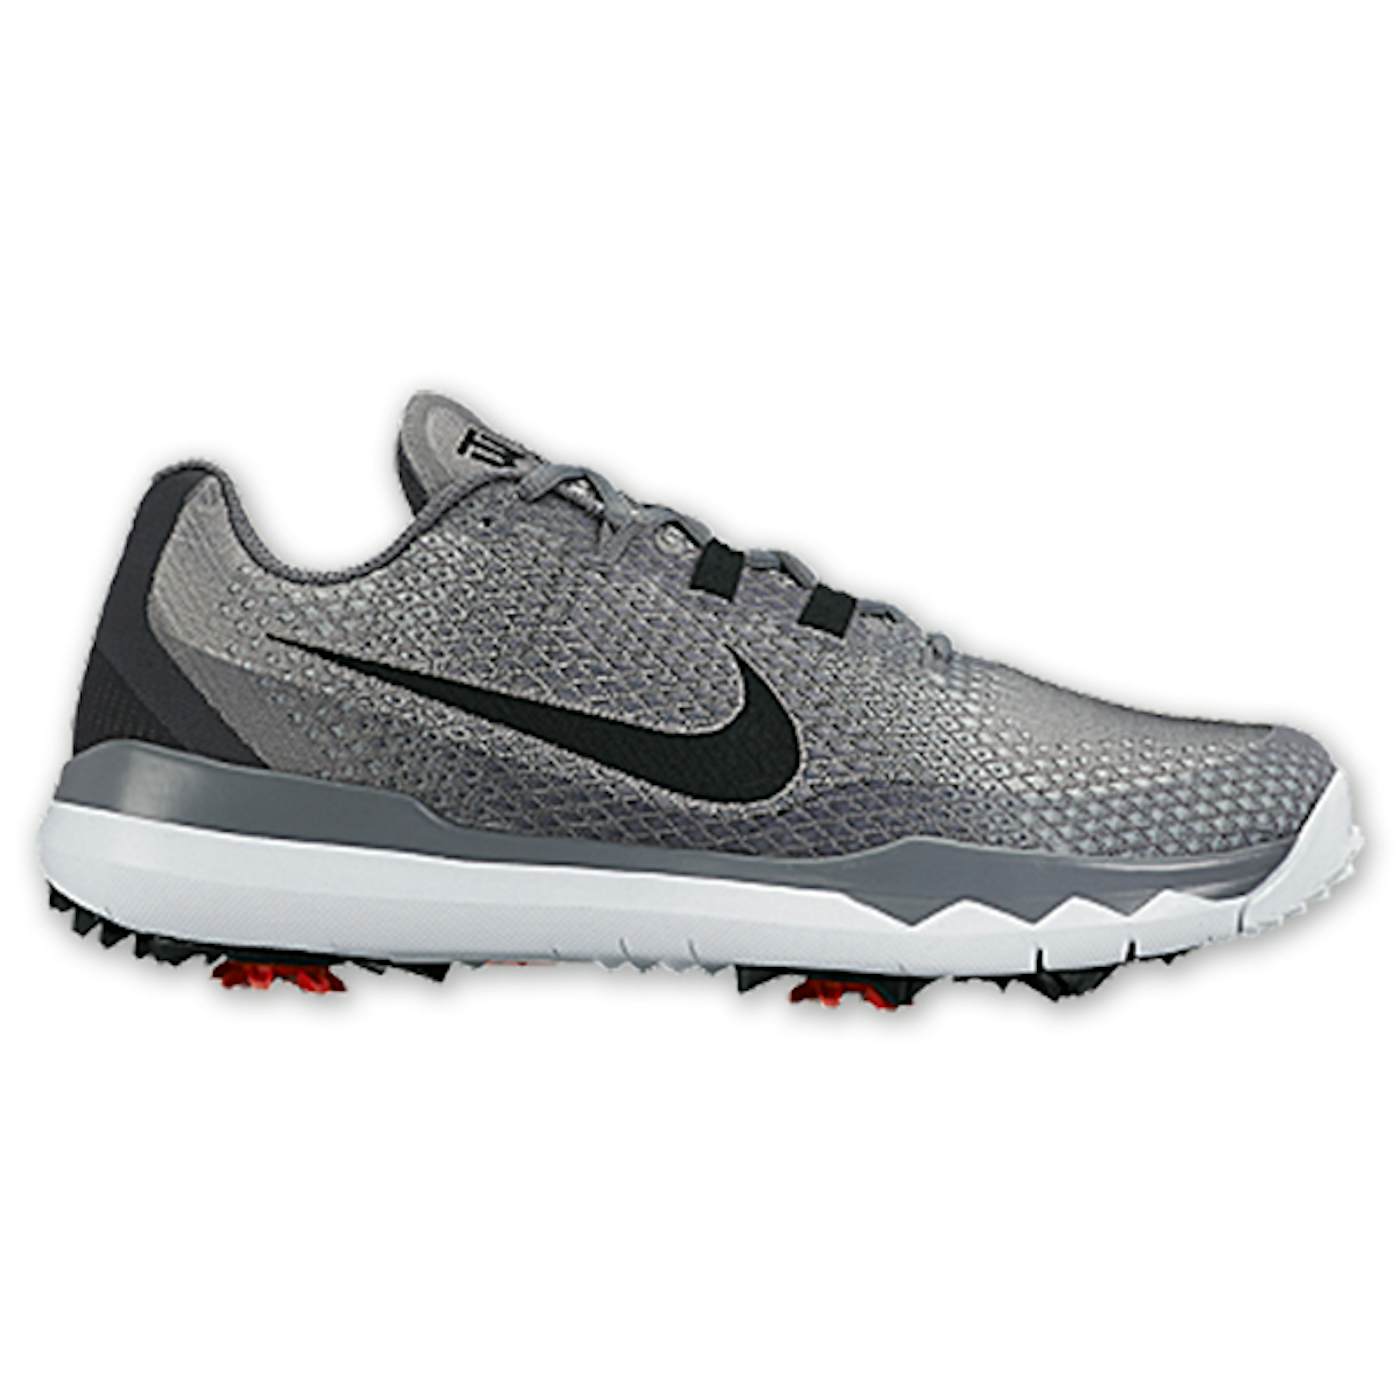 Tiger Woods 2015 Nike Golf Shoes: Silver